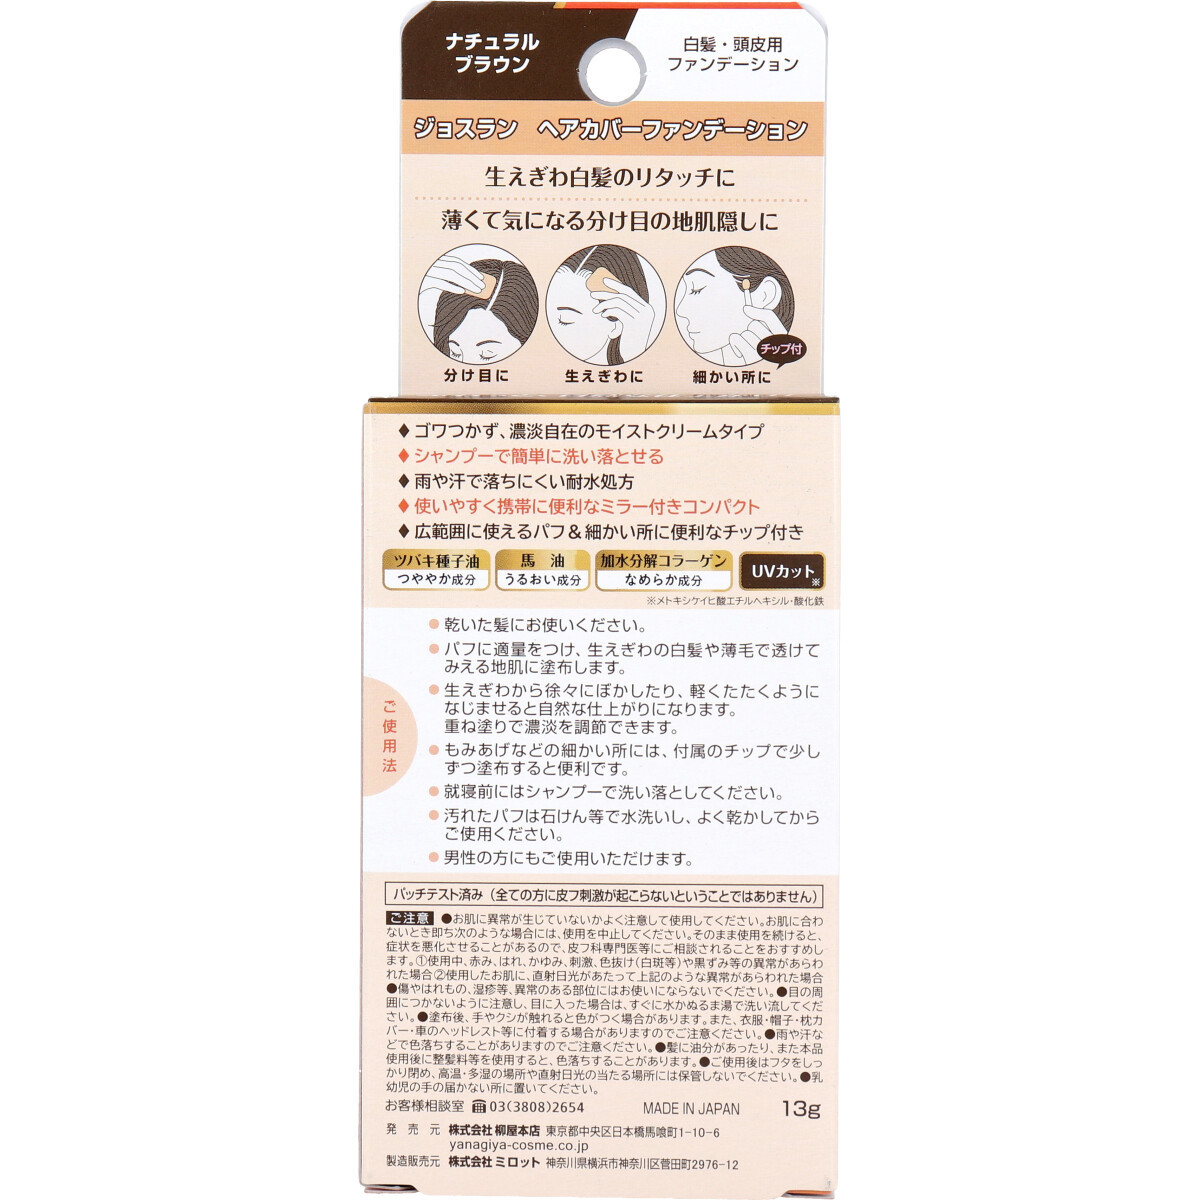  summarize profit jos Ran hair cover foundation white .* scalp for foundation natural Brown 13g x [2 piece ] /k